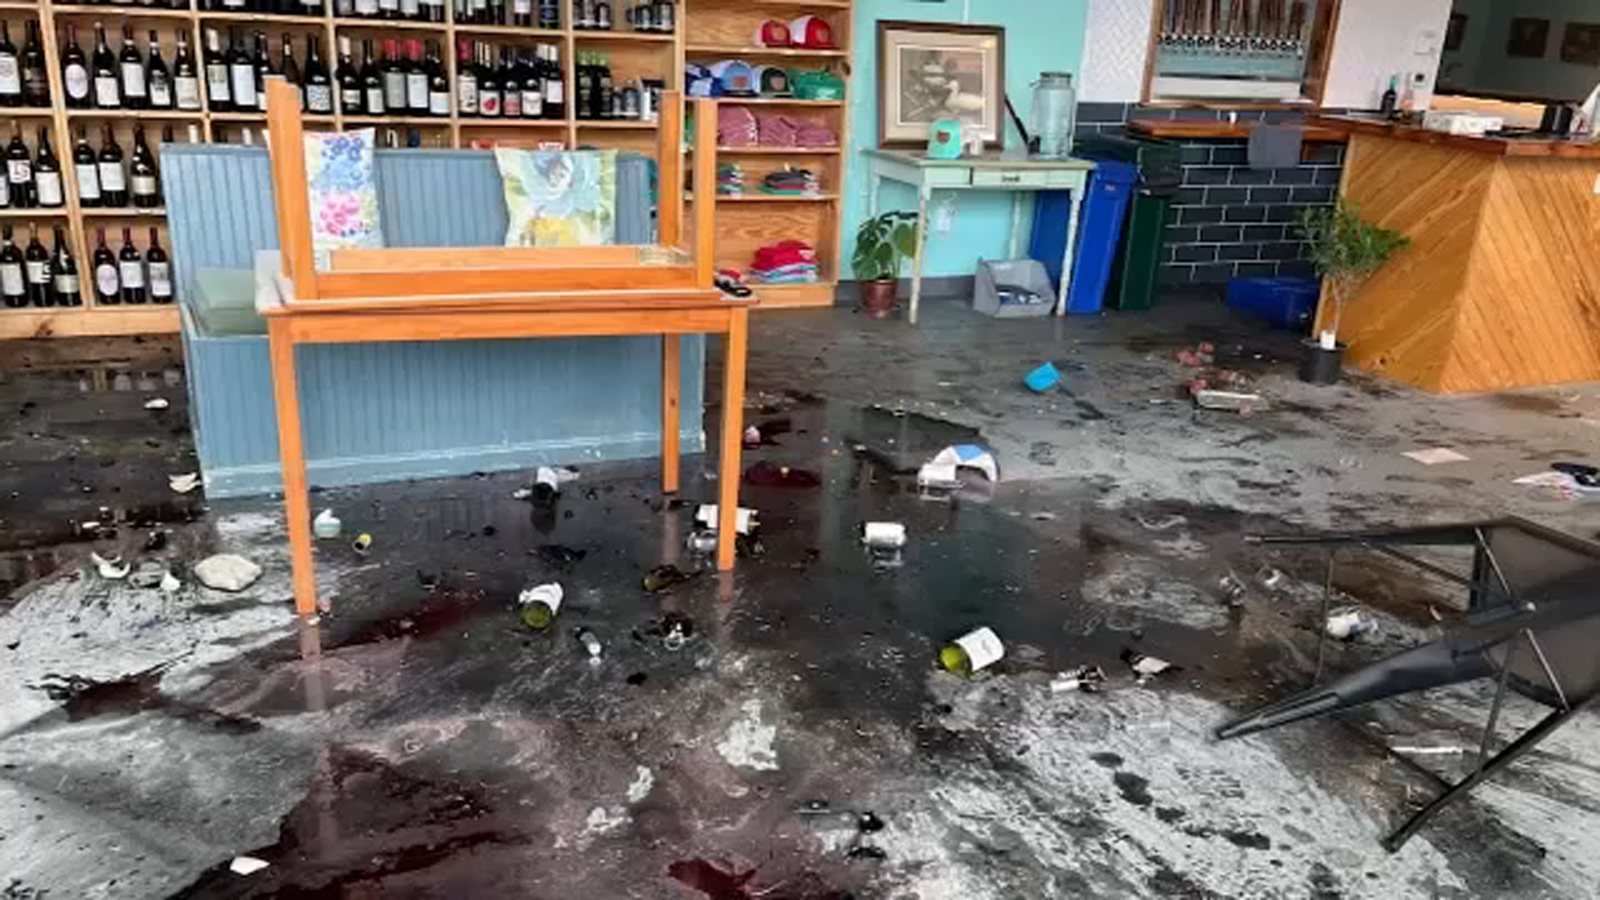 Riparian Provision Company: Raleigh plant, wine and craft beer store ‘just destroyed’ in burglary [Video]